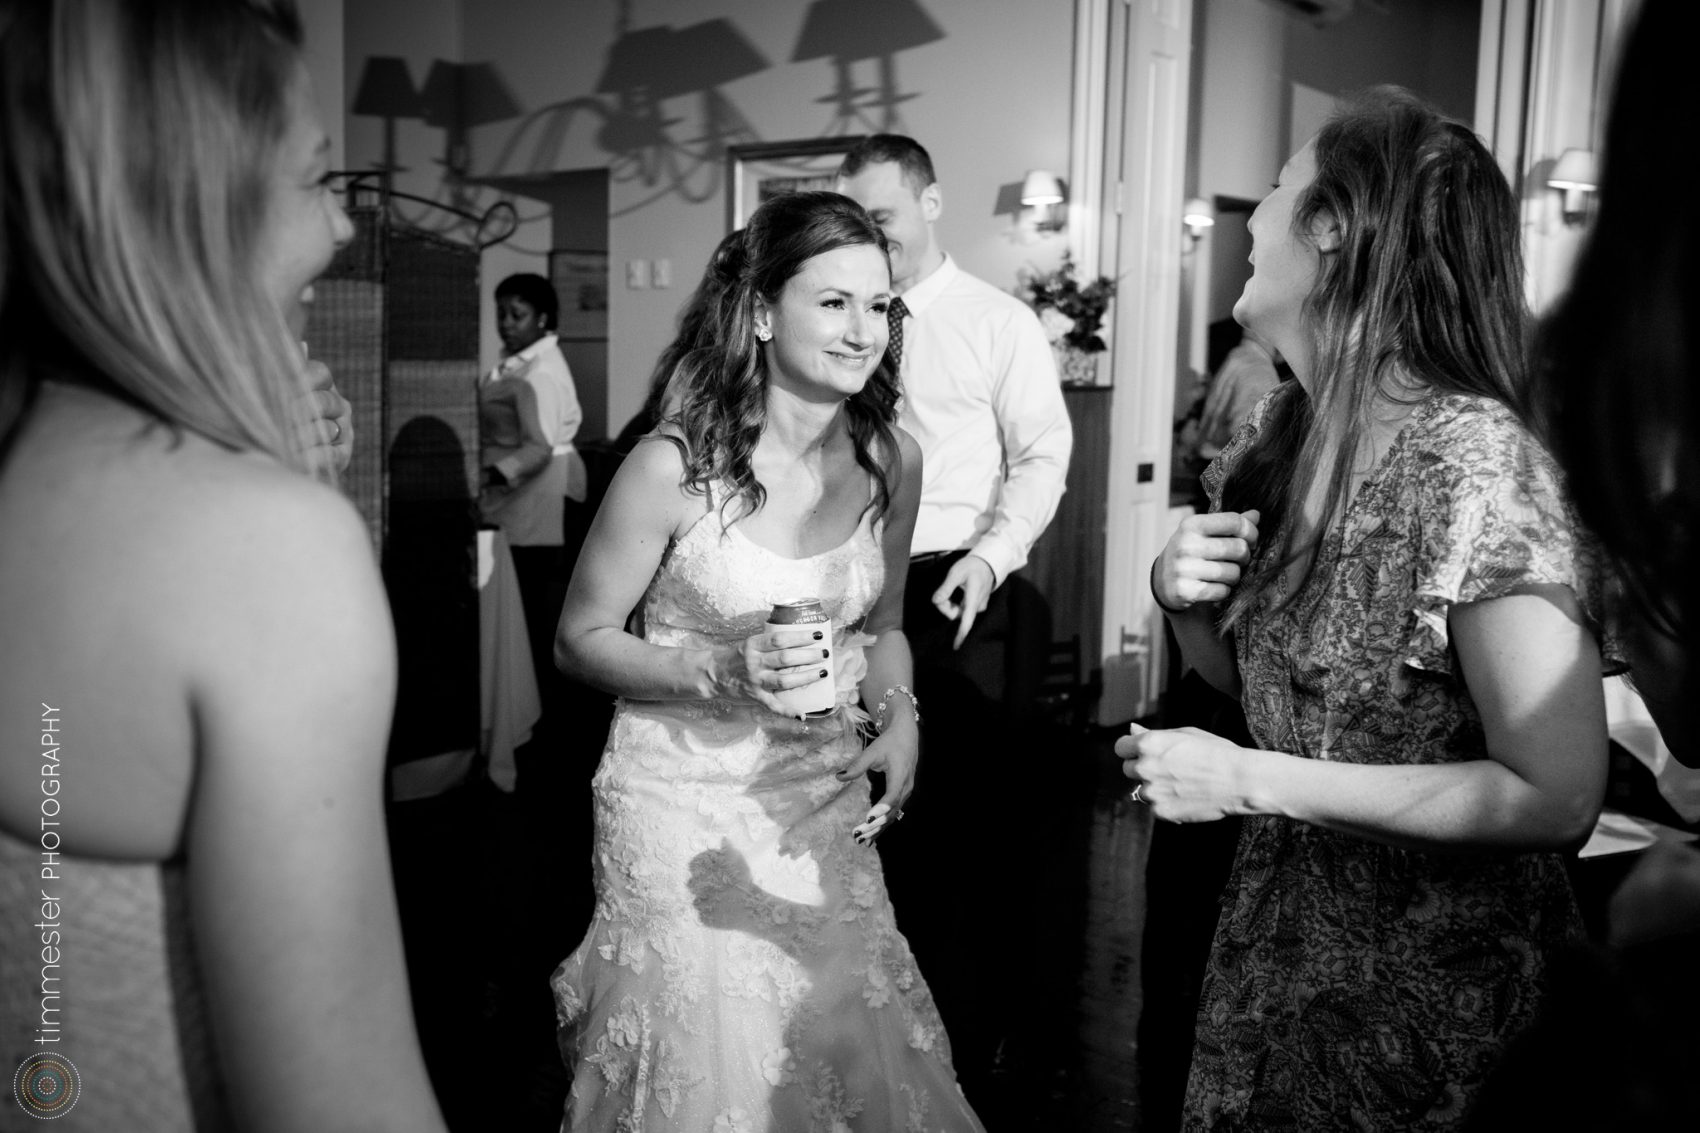 A bride on the dance floor at her wedding reception in Raleigh, NC at Caffe Luna.